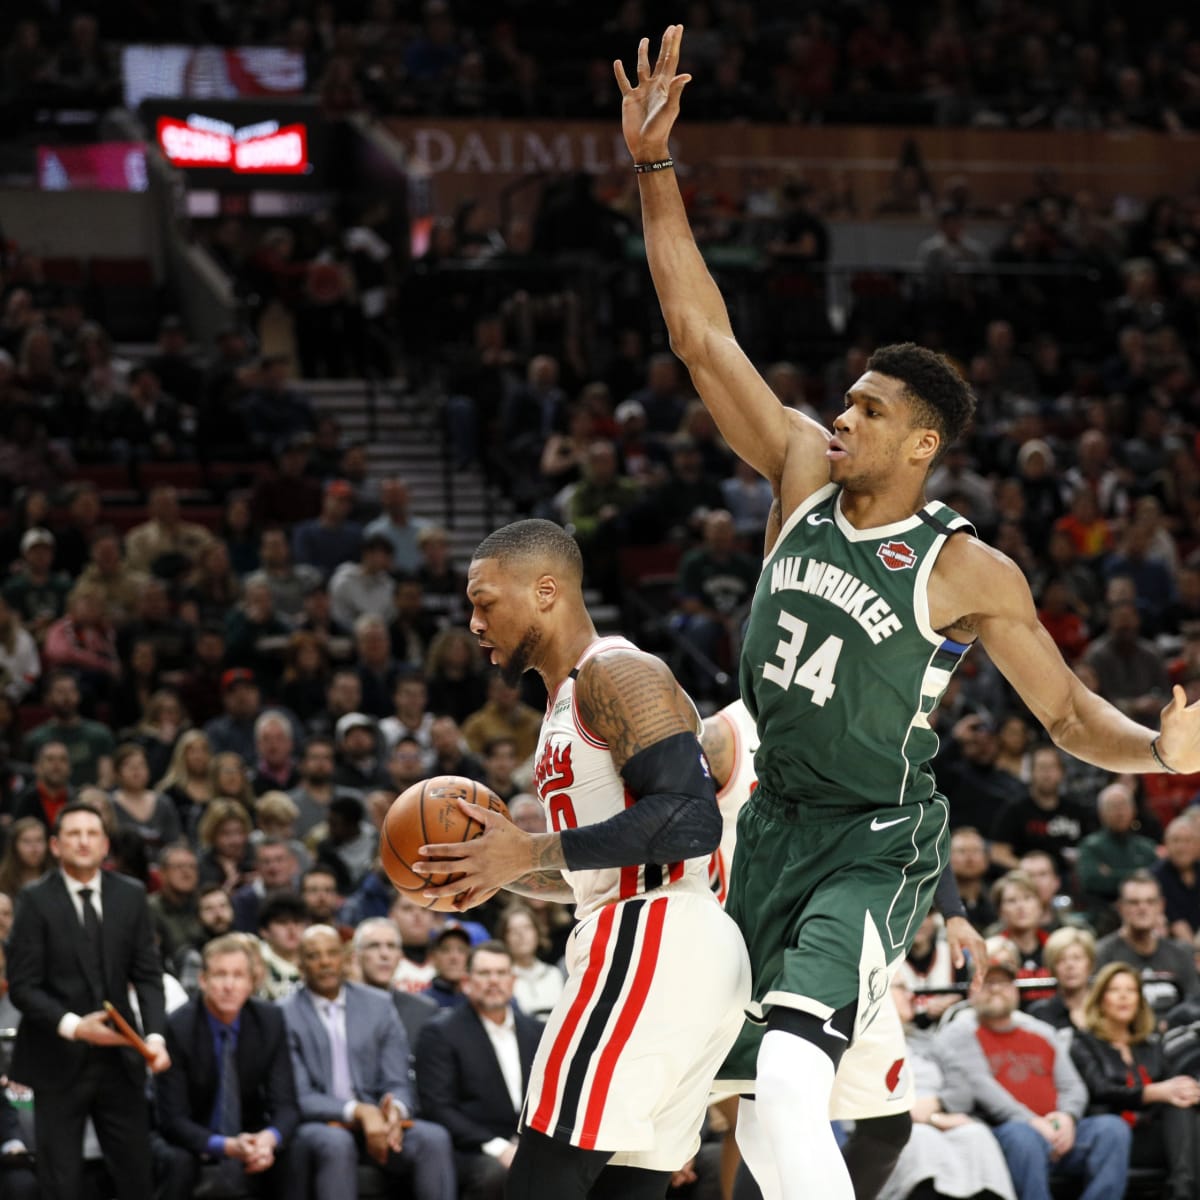 Bucks inviting fans to welcome rally Saturday for Damian Lillard